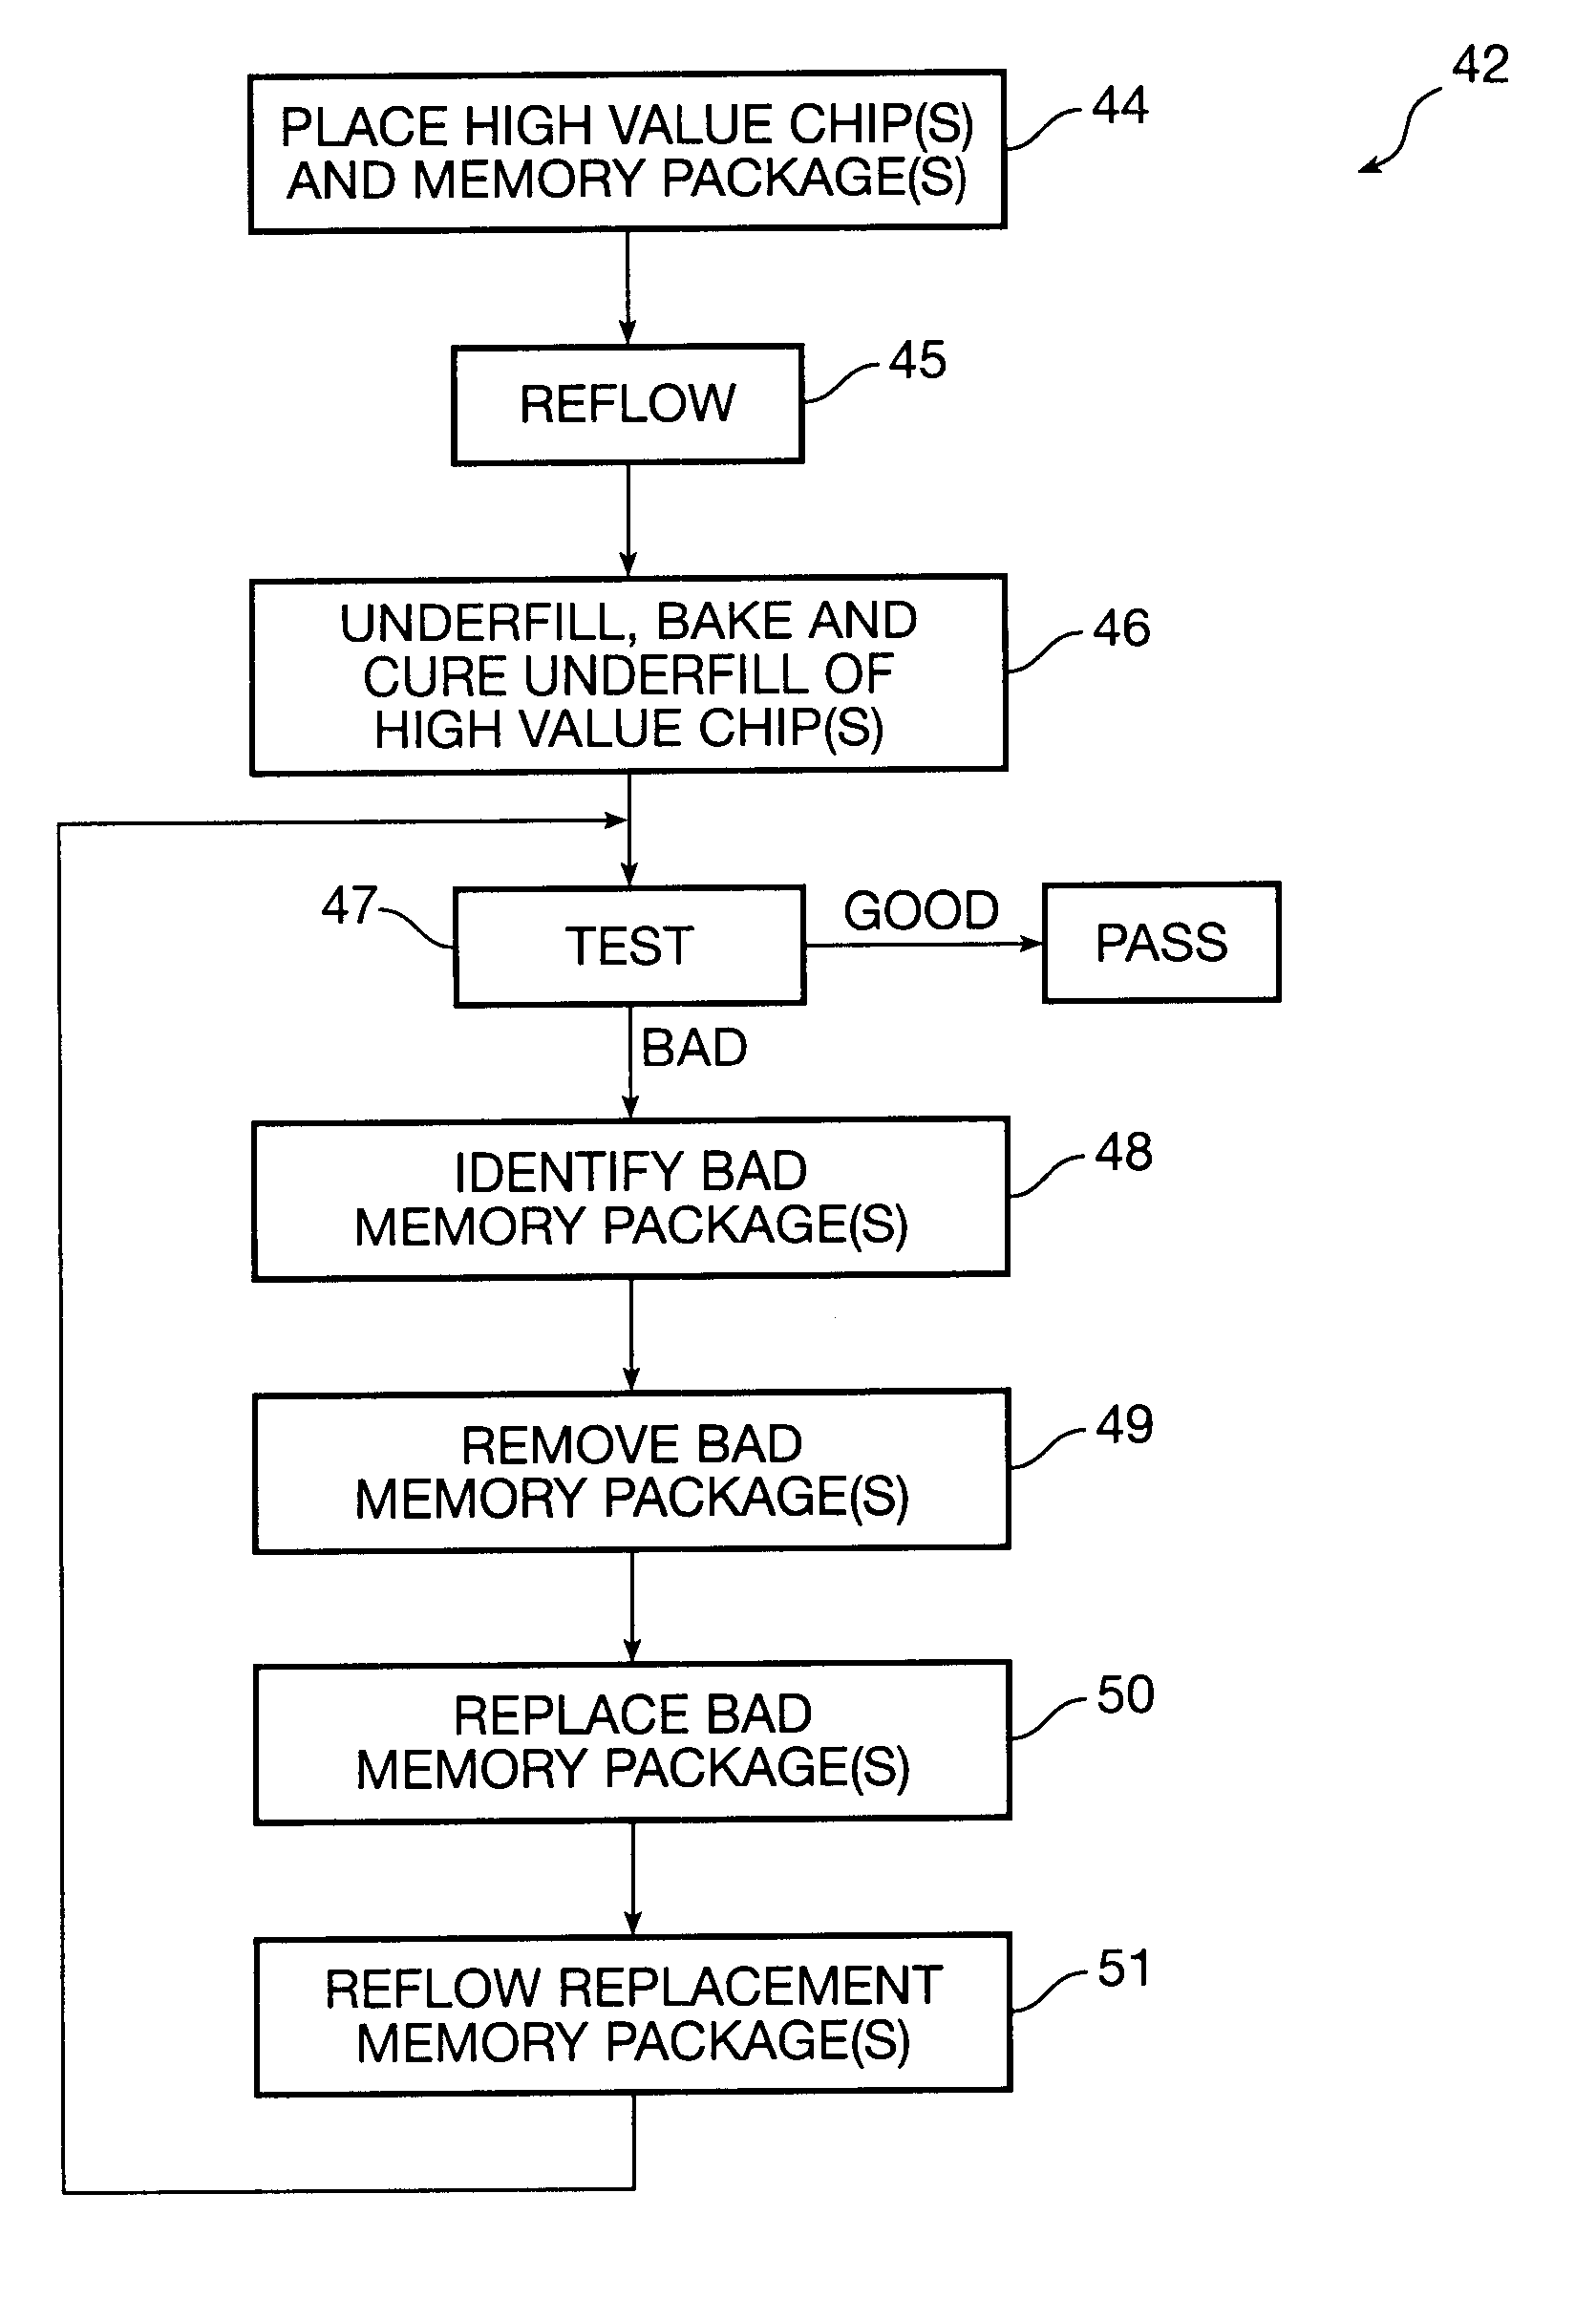 Flip chip and packaged memory module